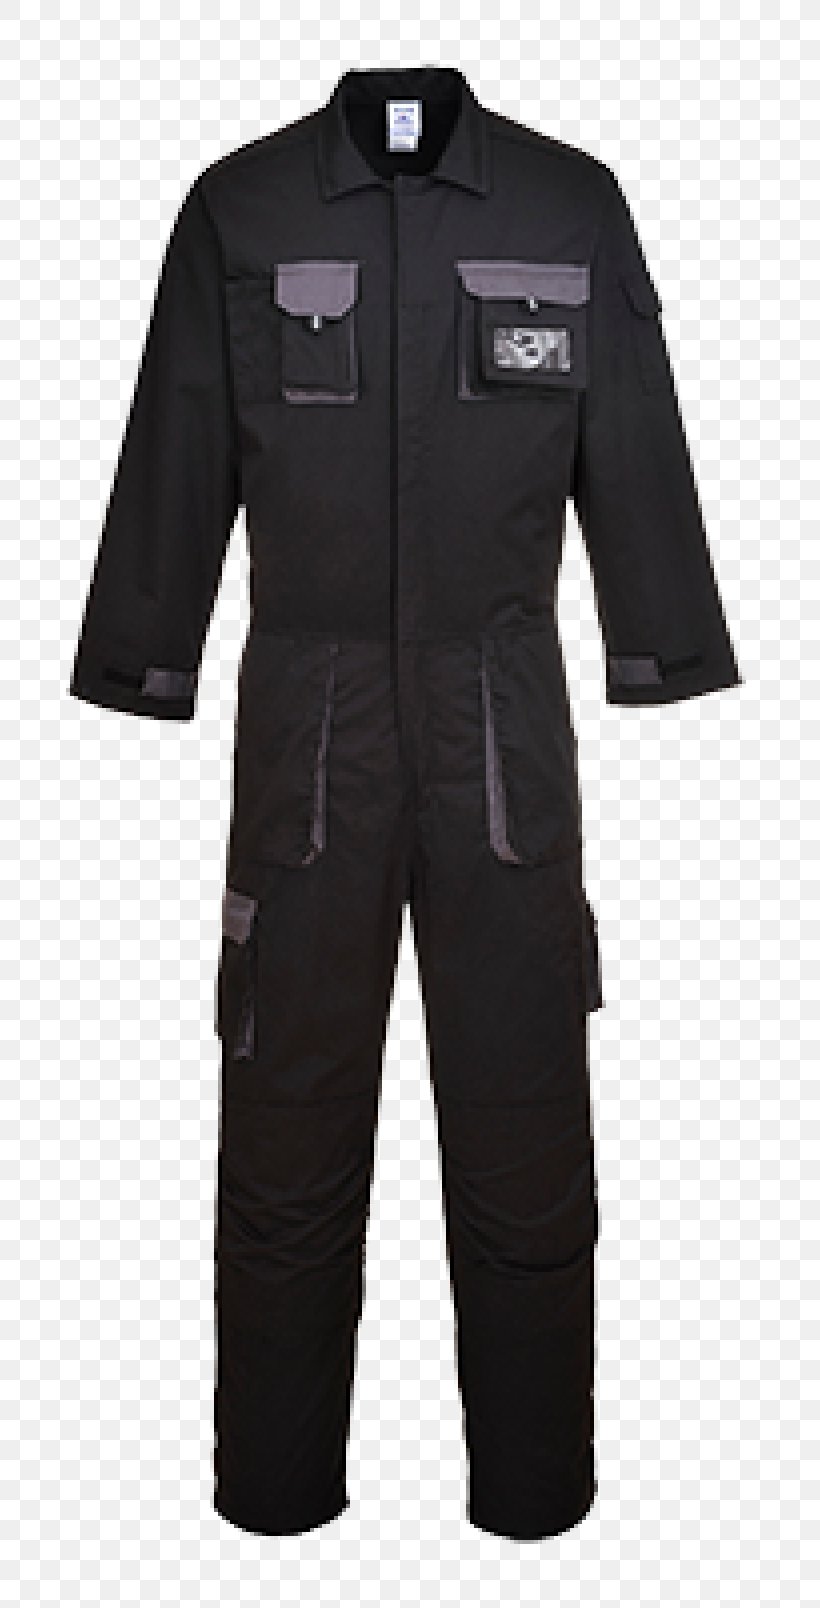 Workwear Boilersuit Overall Clothing Portwest, PNG, 800x1608px, Workwear, Bib, Boilersuit, Boot, Braces Download Free